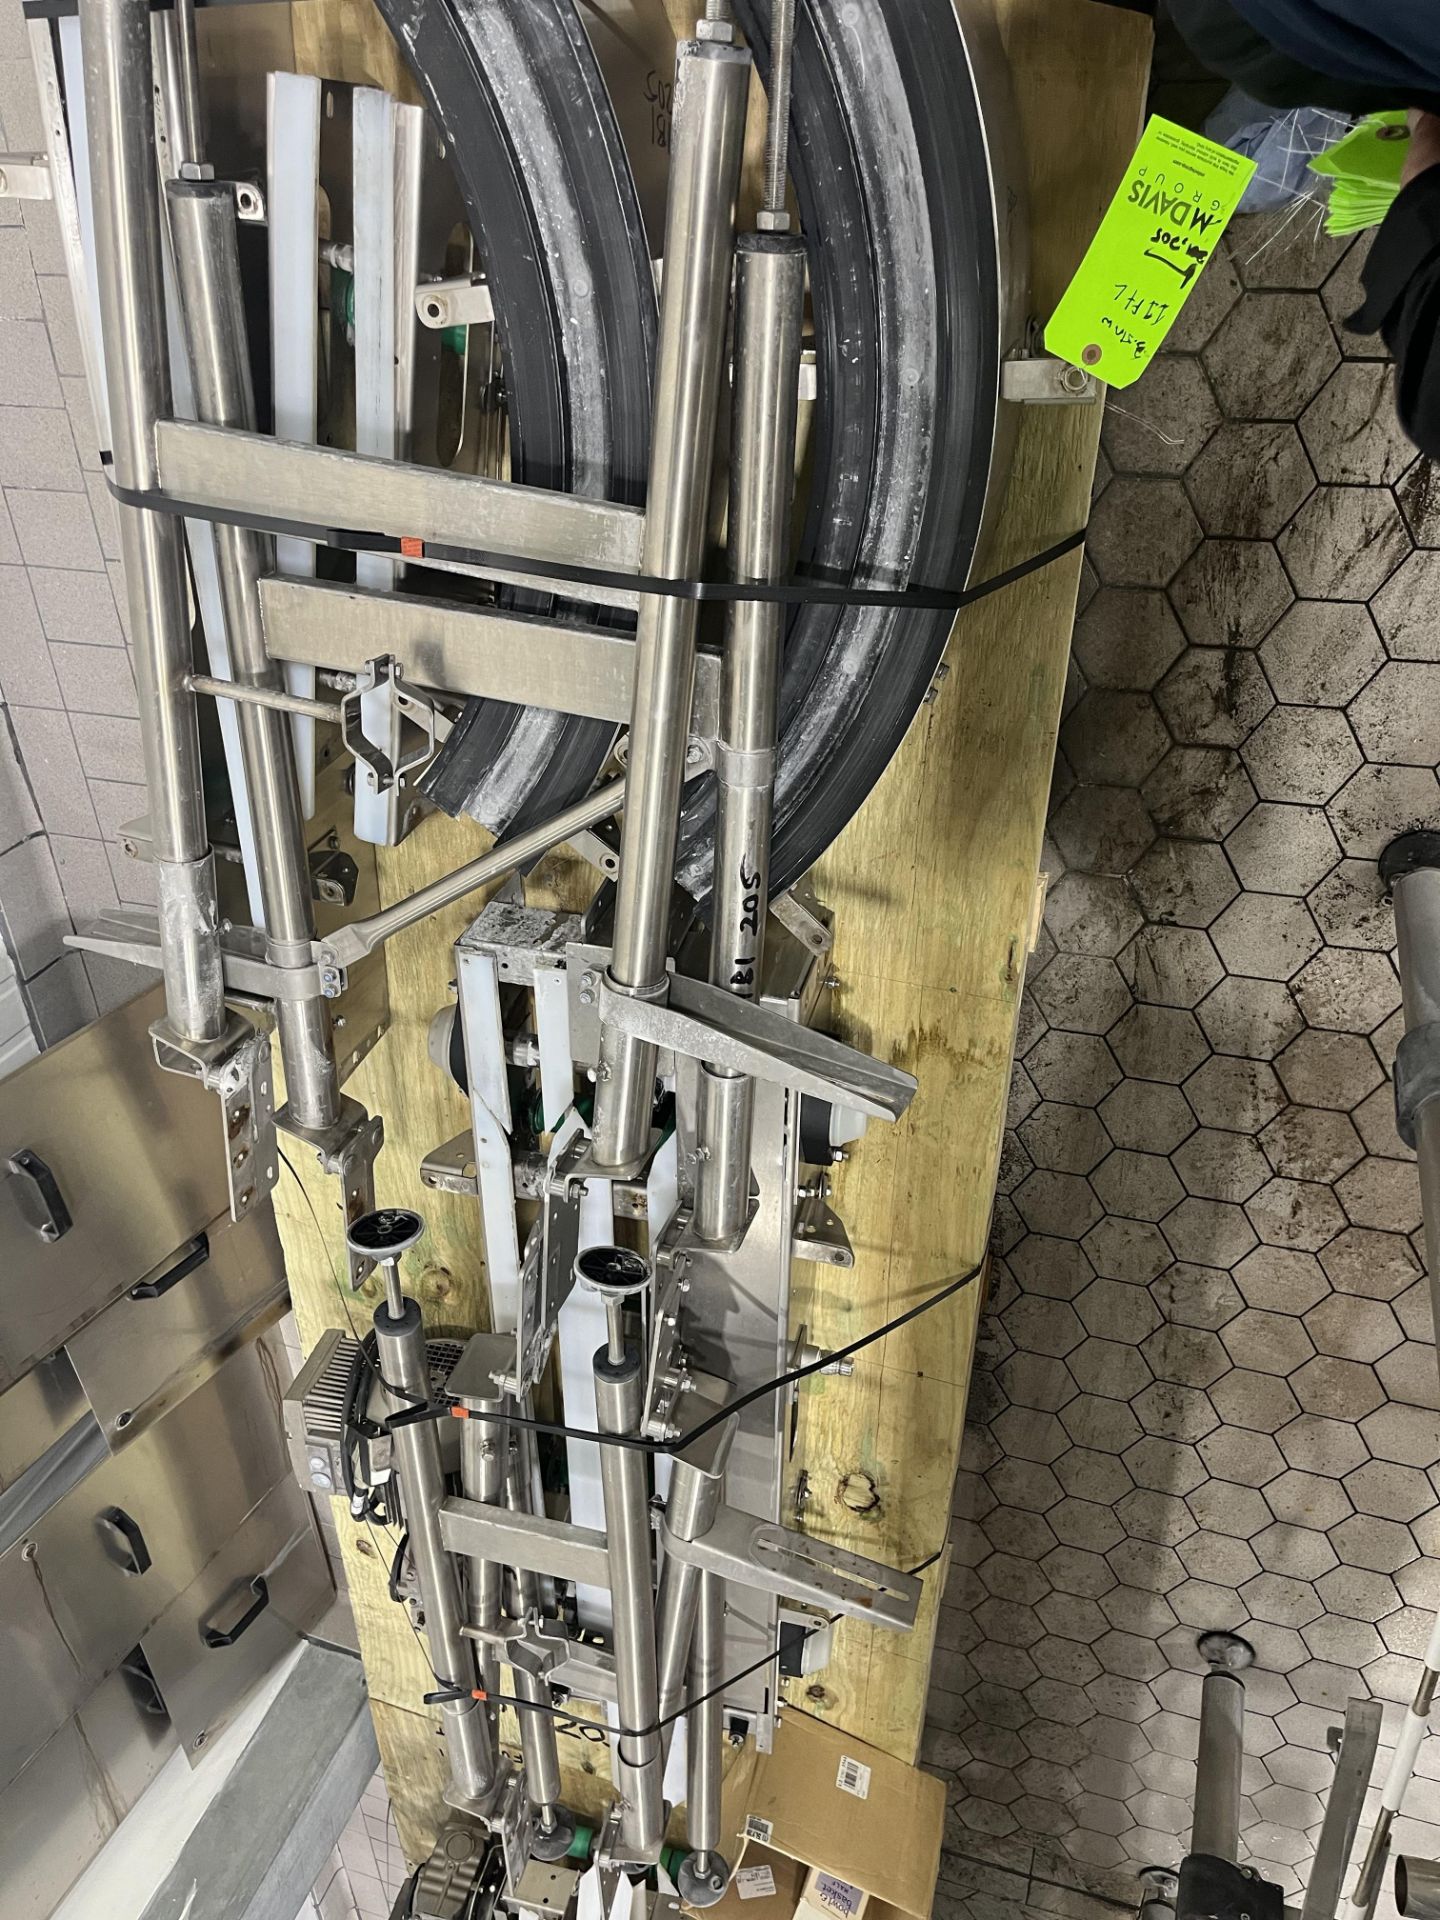 SECTION OF SIDEL S/S CONVEYOR 11 FT" IN LENGTH 4" IN W" (MISSING BELT) - Image 2 of 2